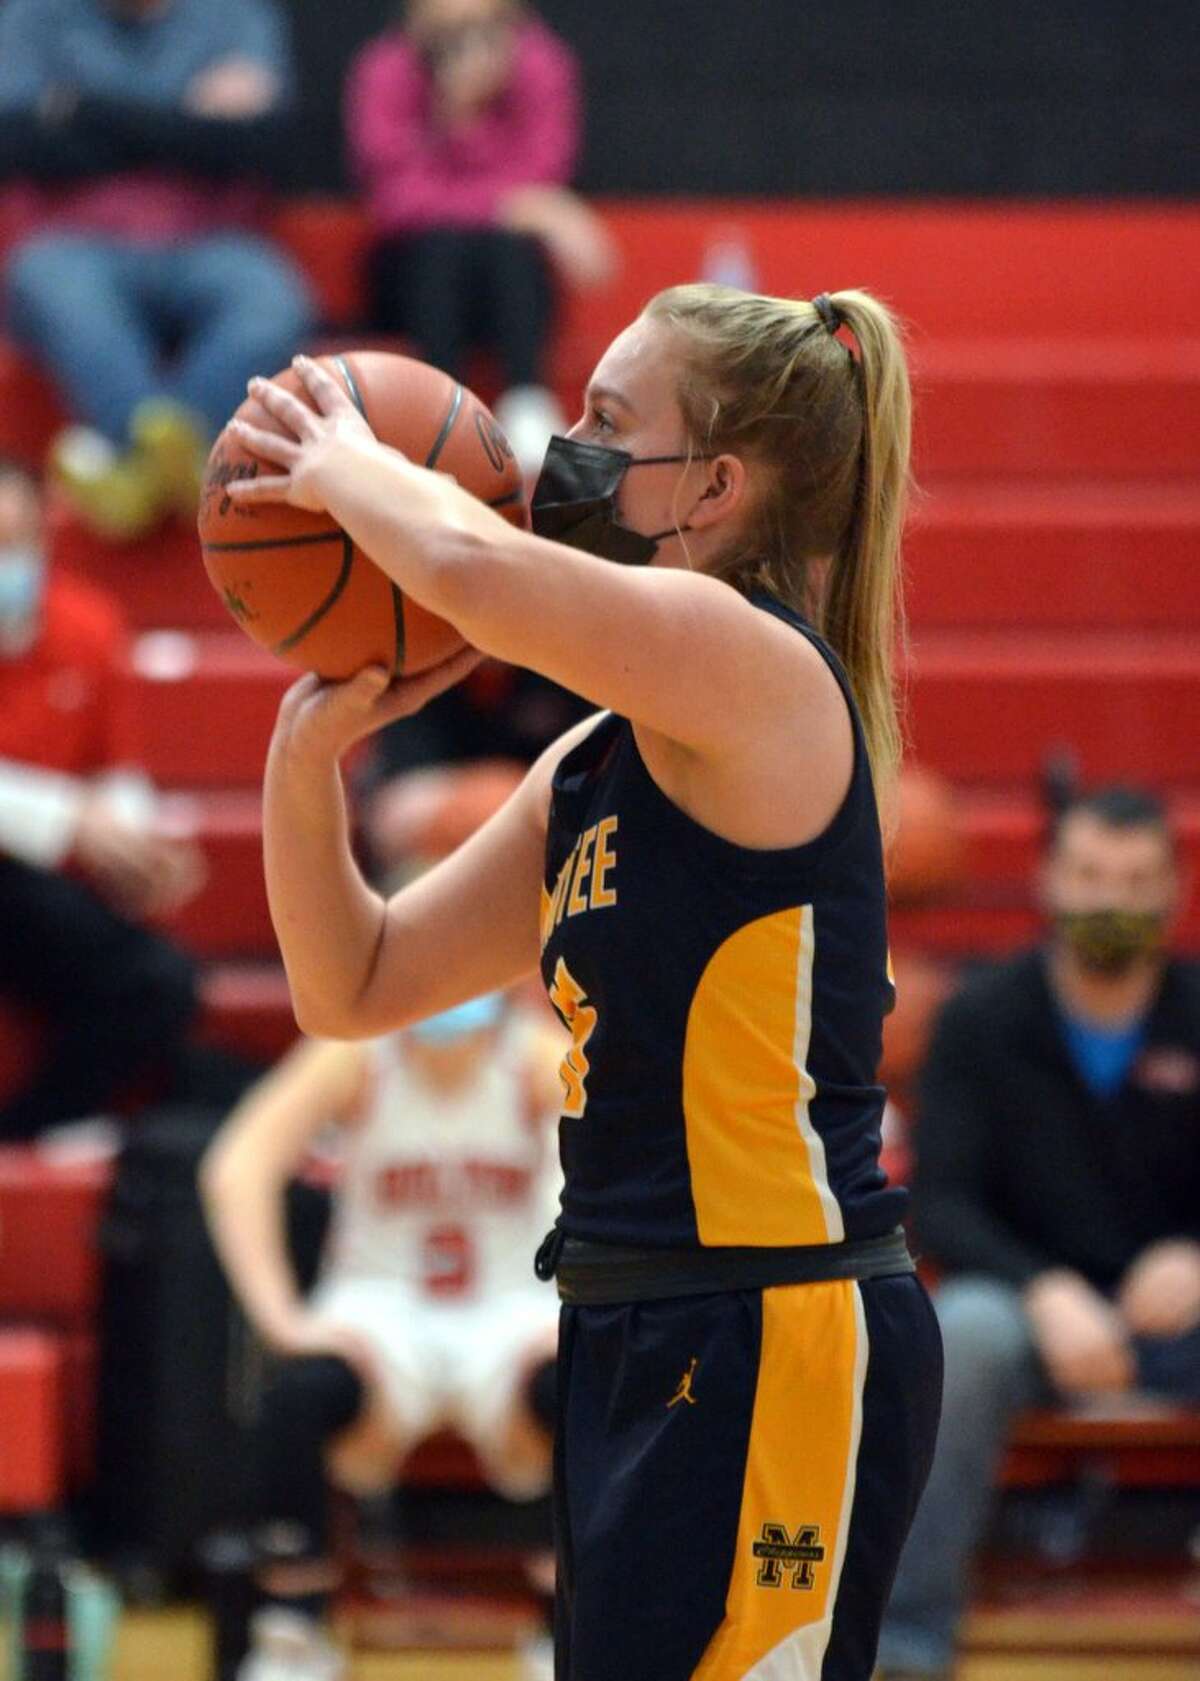 The Manistee girls basketball team topped Holton, 46-31, on the road Friday, March 5, 2021.